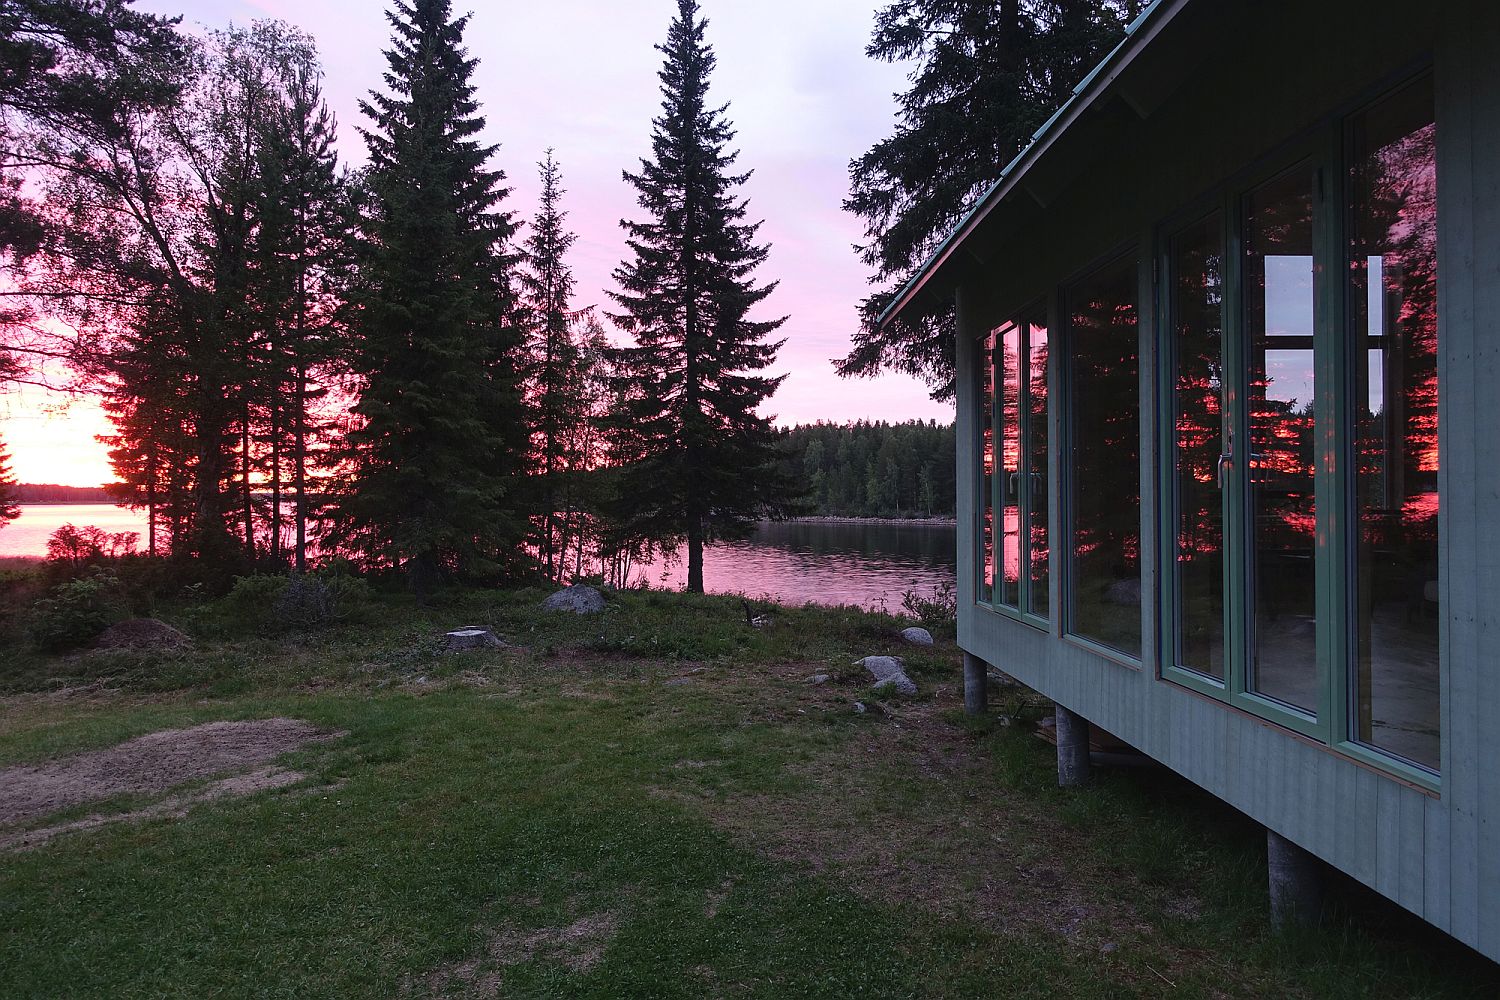 Summer-cabin-on-waters-edge-is-a-relaxing-getaway